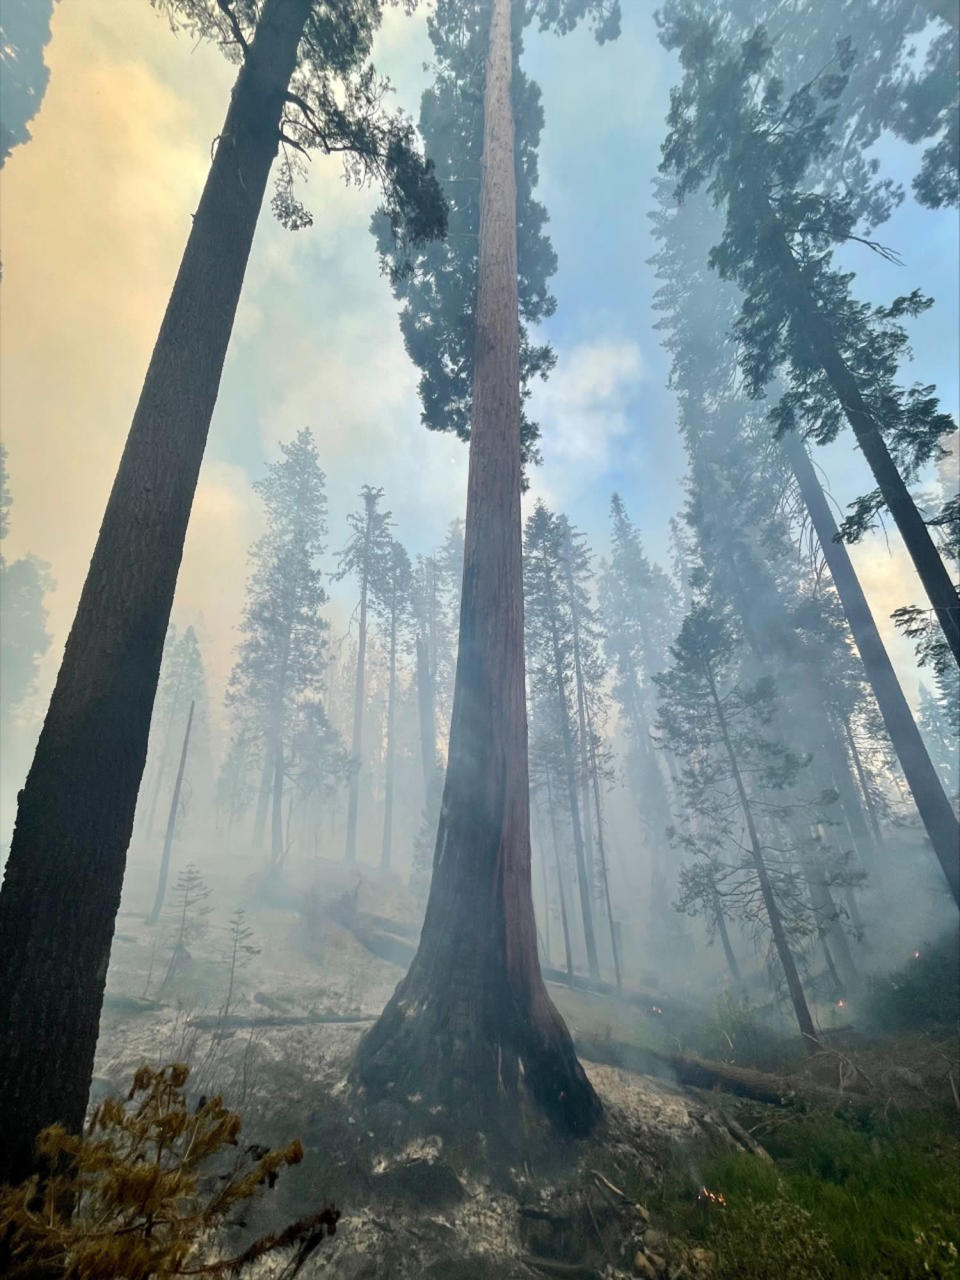 In this photo released by the National Park Service, smoke from the Washburn Fire rises near the lower portion of the Mariposa Grove in Yosemite National Park, Calif., Thursday, July 7, 2022. A portion of Yosemite National Park has been closed as a wildfire rages near a grove of California's famous giant sequoia trees, officials said. (National Park Service via AP)